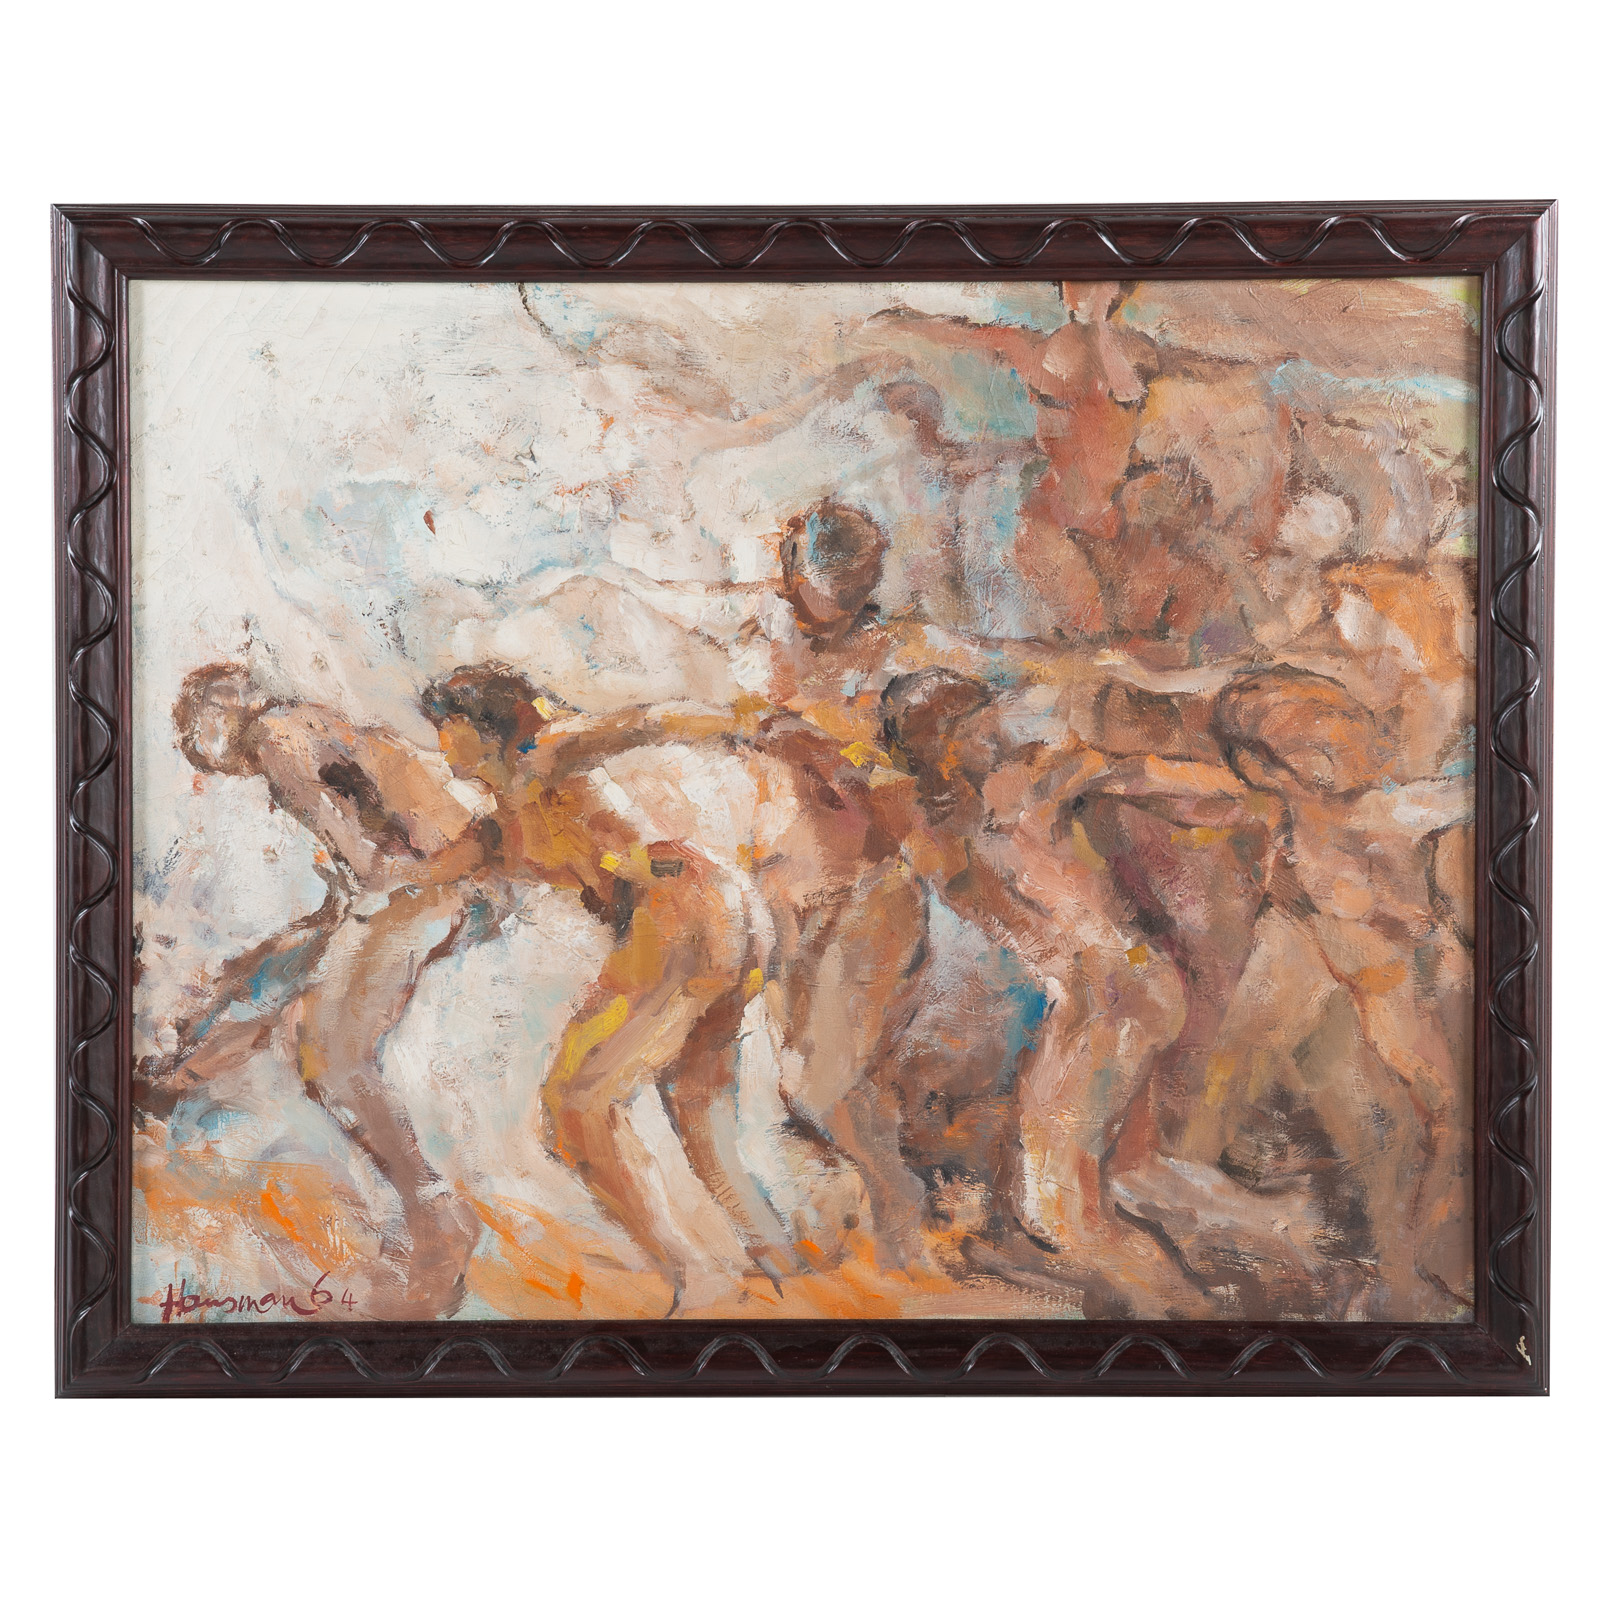 HAUSMAN. ABSTRACT WITH FIGURES, OIL